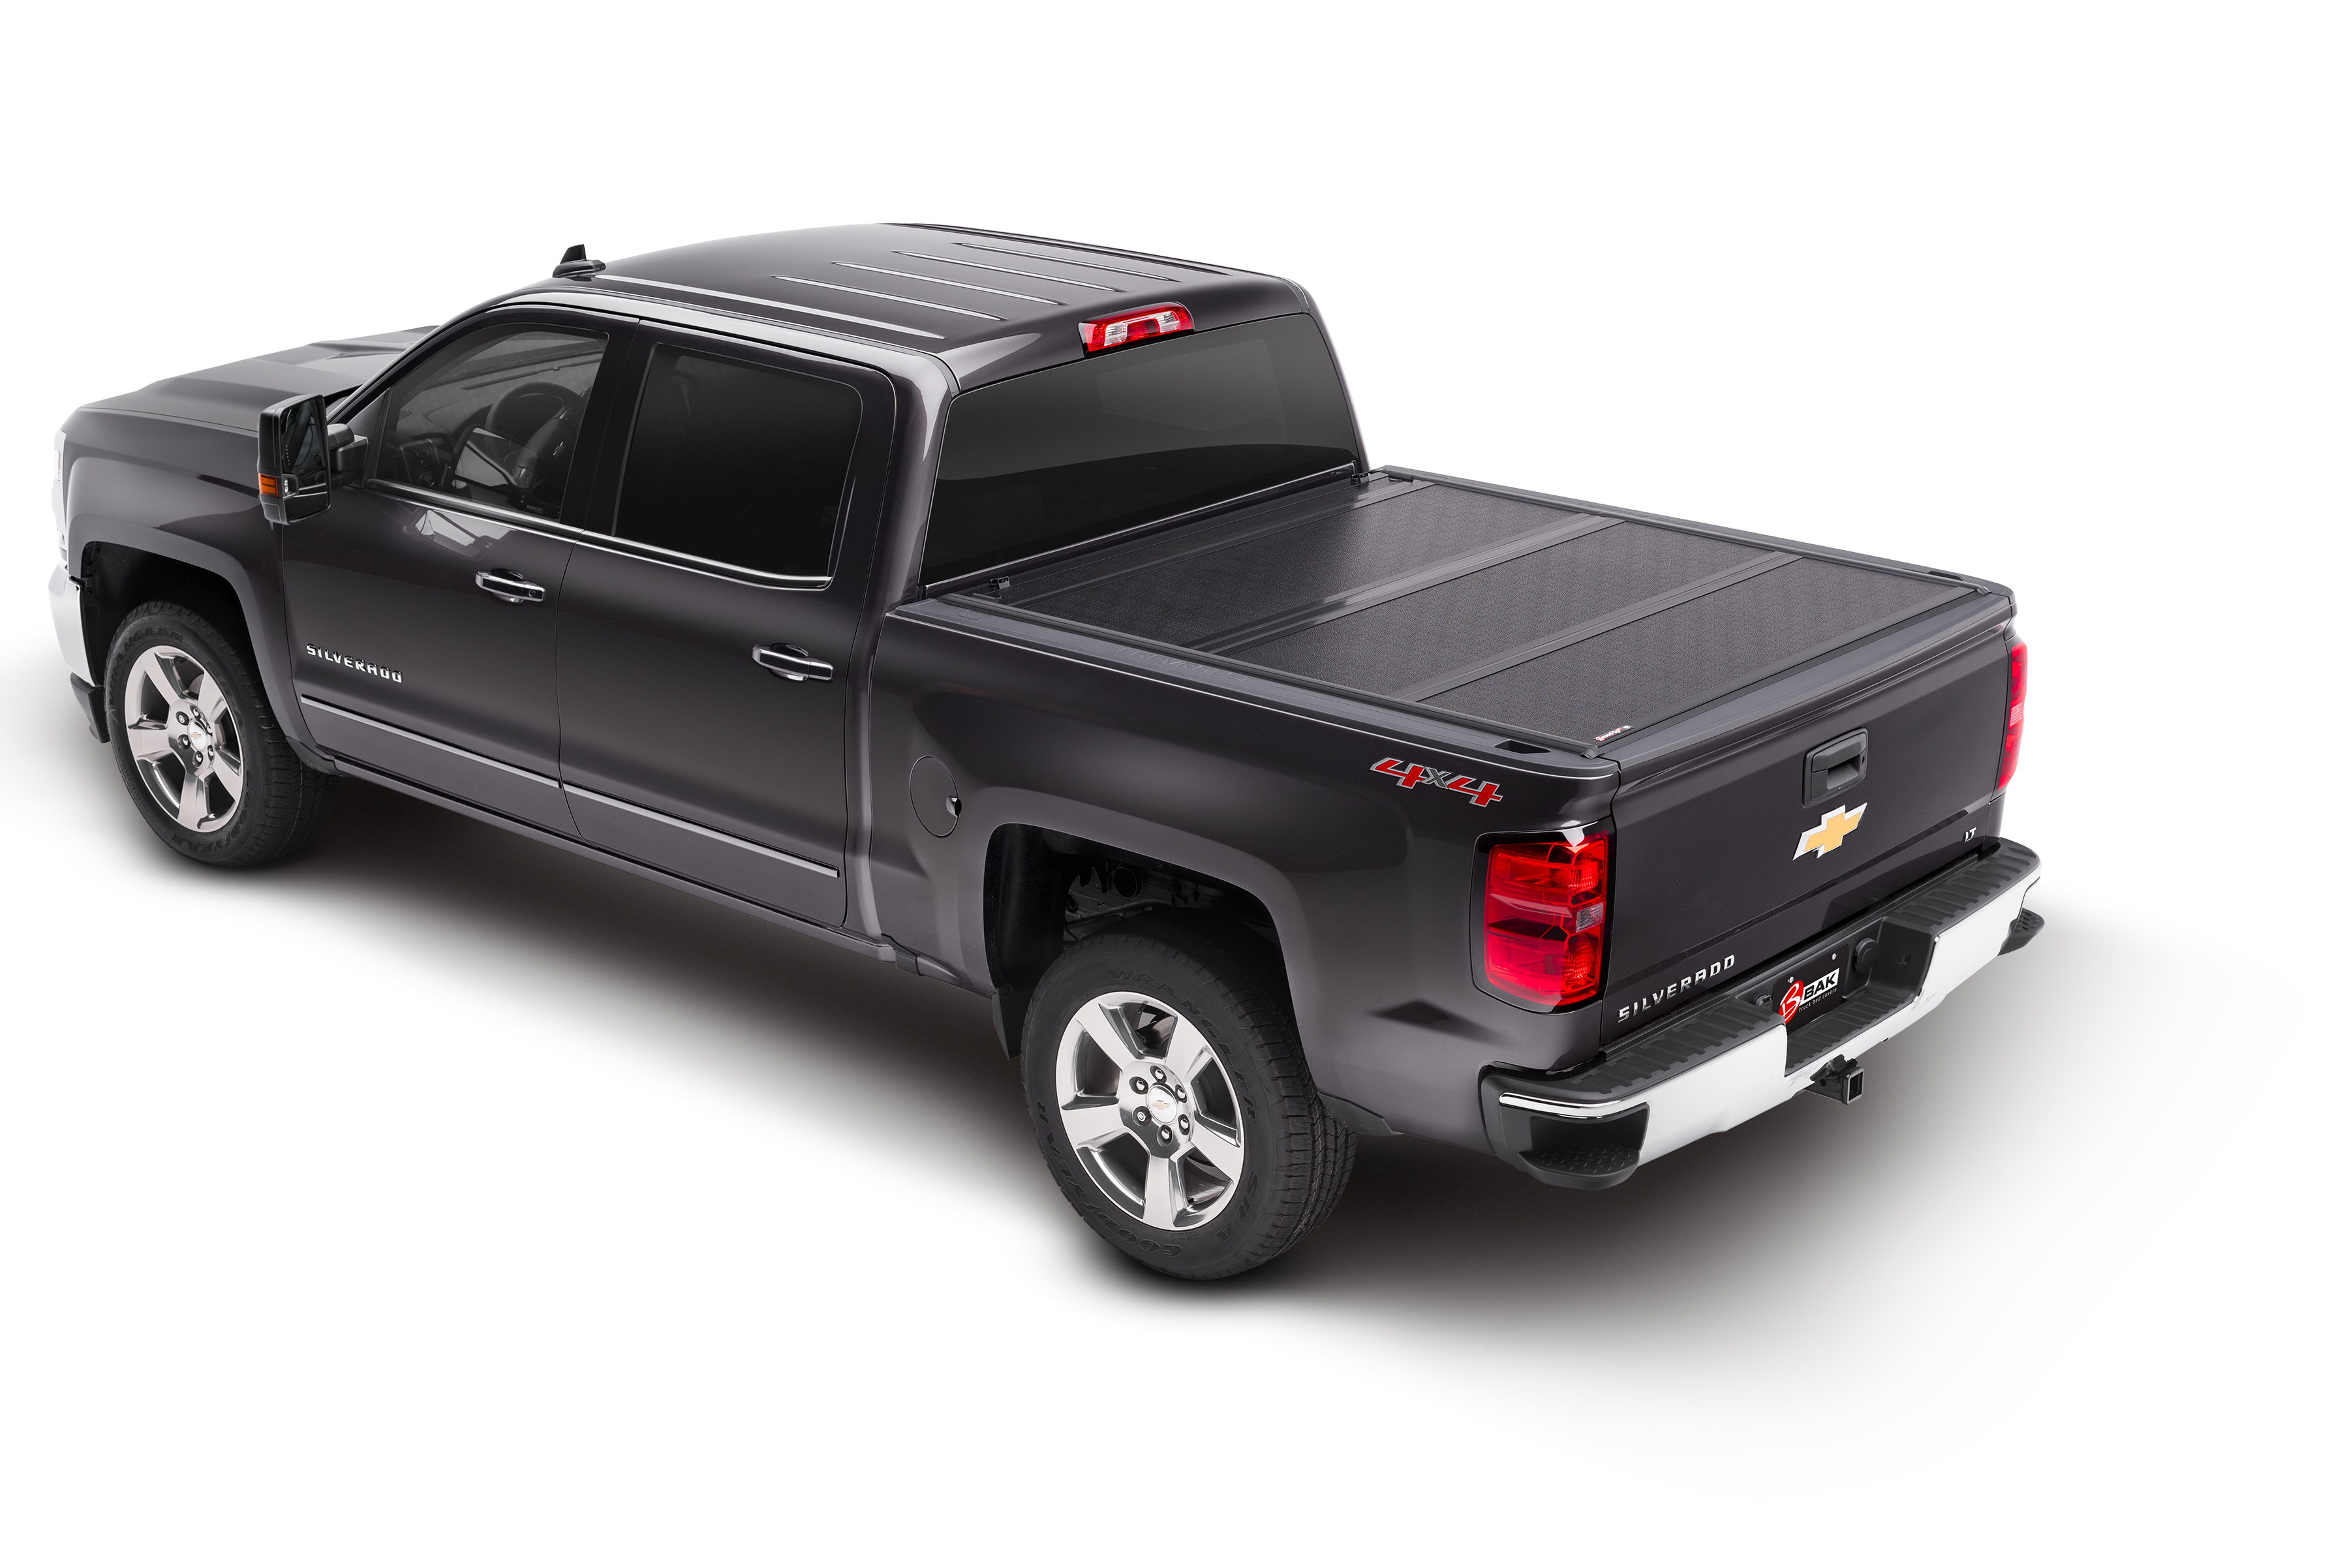 BAKFlip G2 00-06 TOYOTA Tundra Access Cab 6' 4 Bed